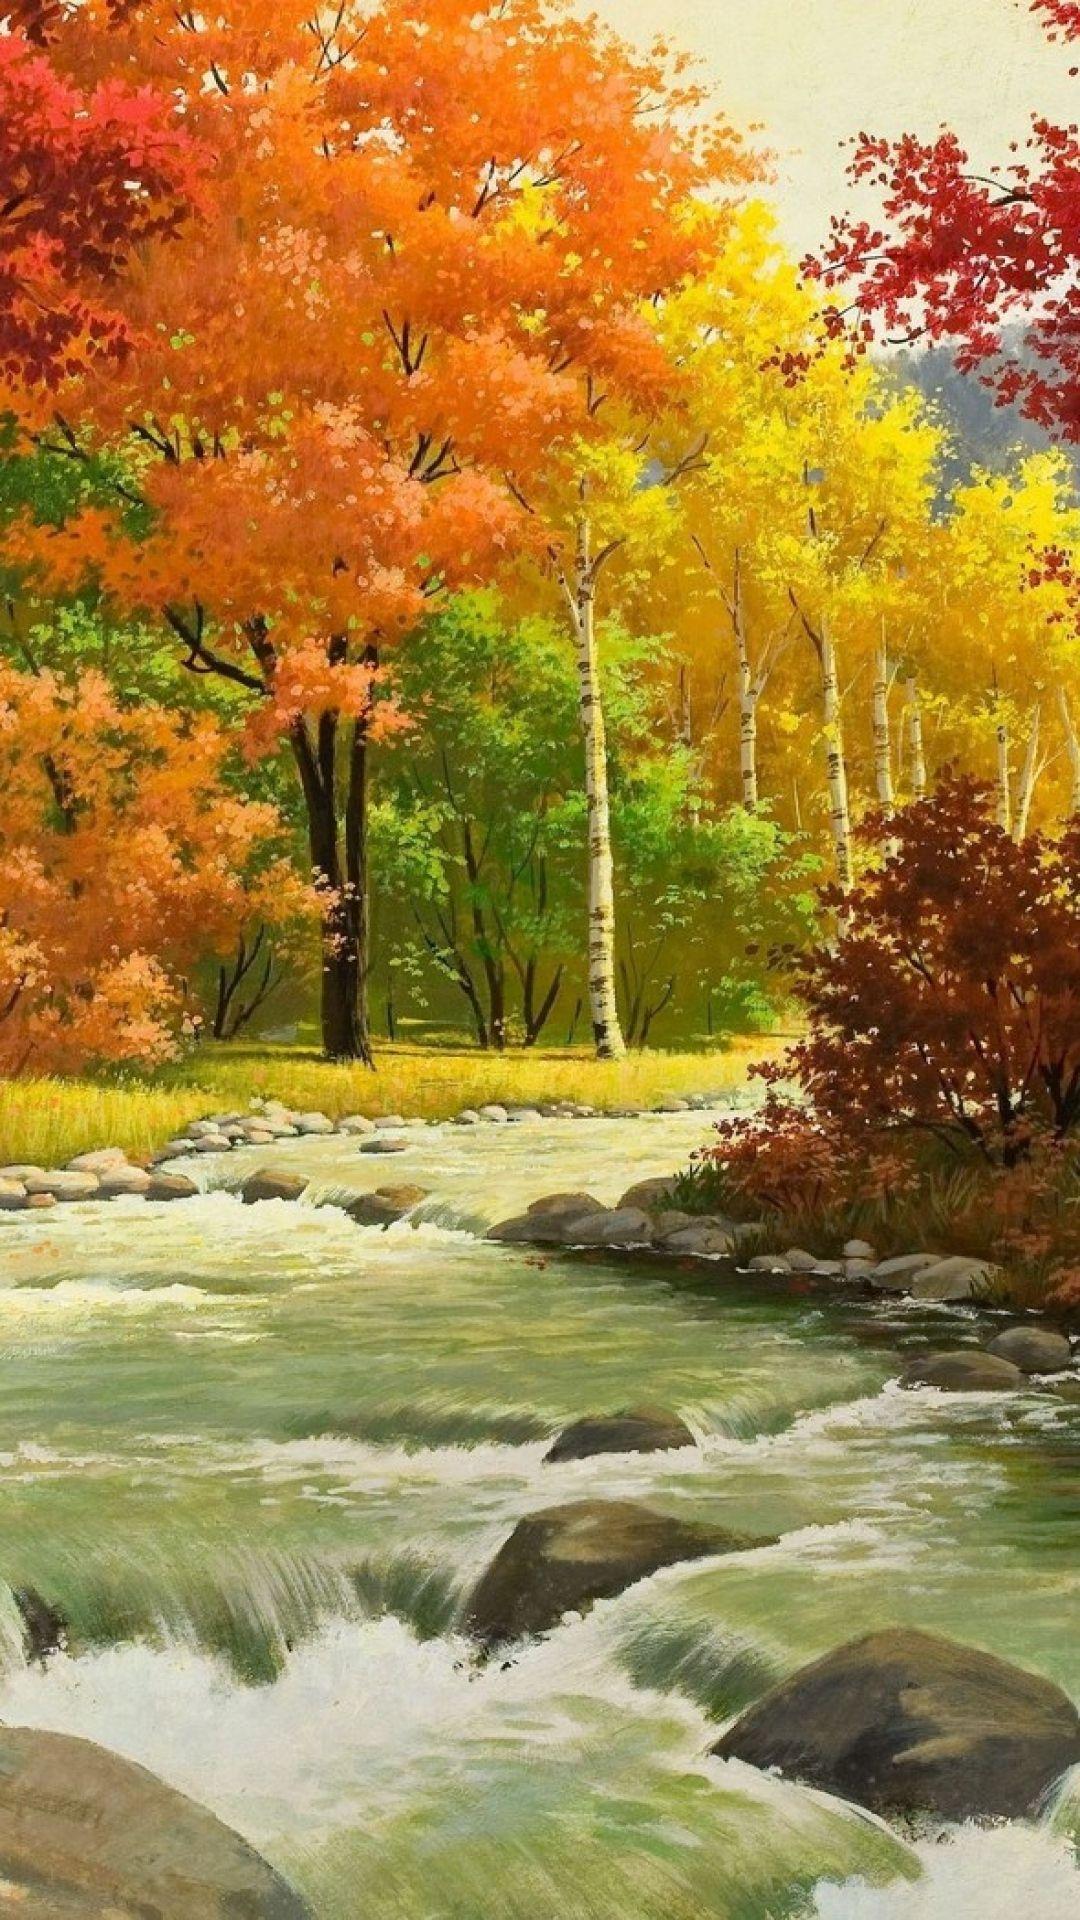 Download Wallpaper 1080x1920 Autumn, Landscape, Painting, River, Wood Sony Xperia Z ZL, Z, Samsung Galaxy S. Autumn landscape, Landscape art, Autumn painting